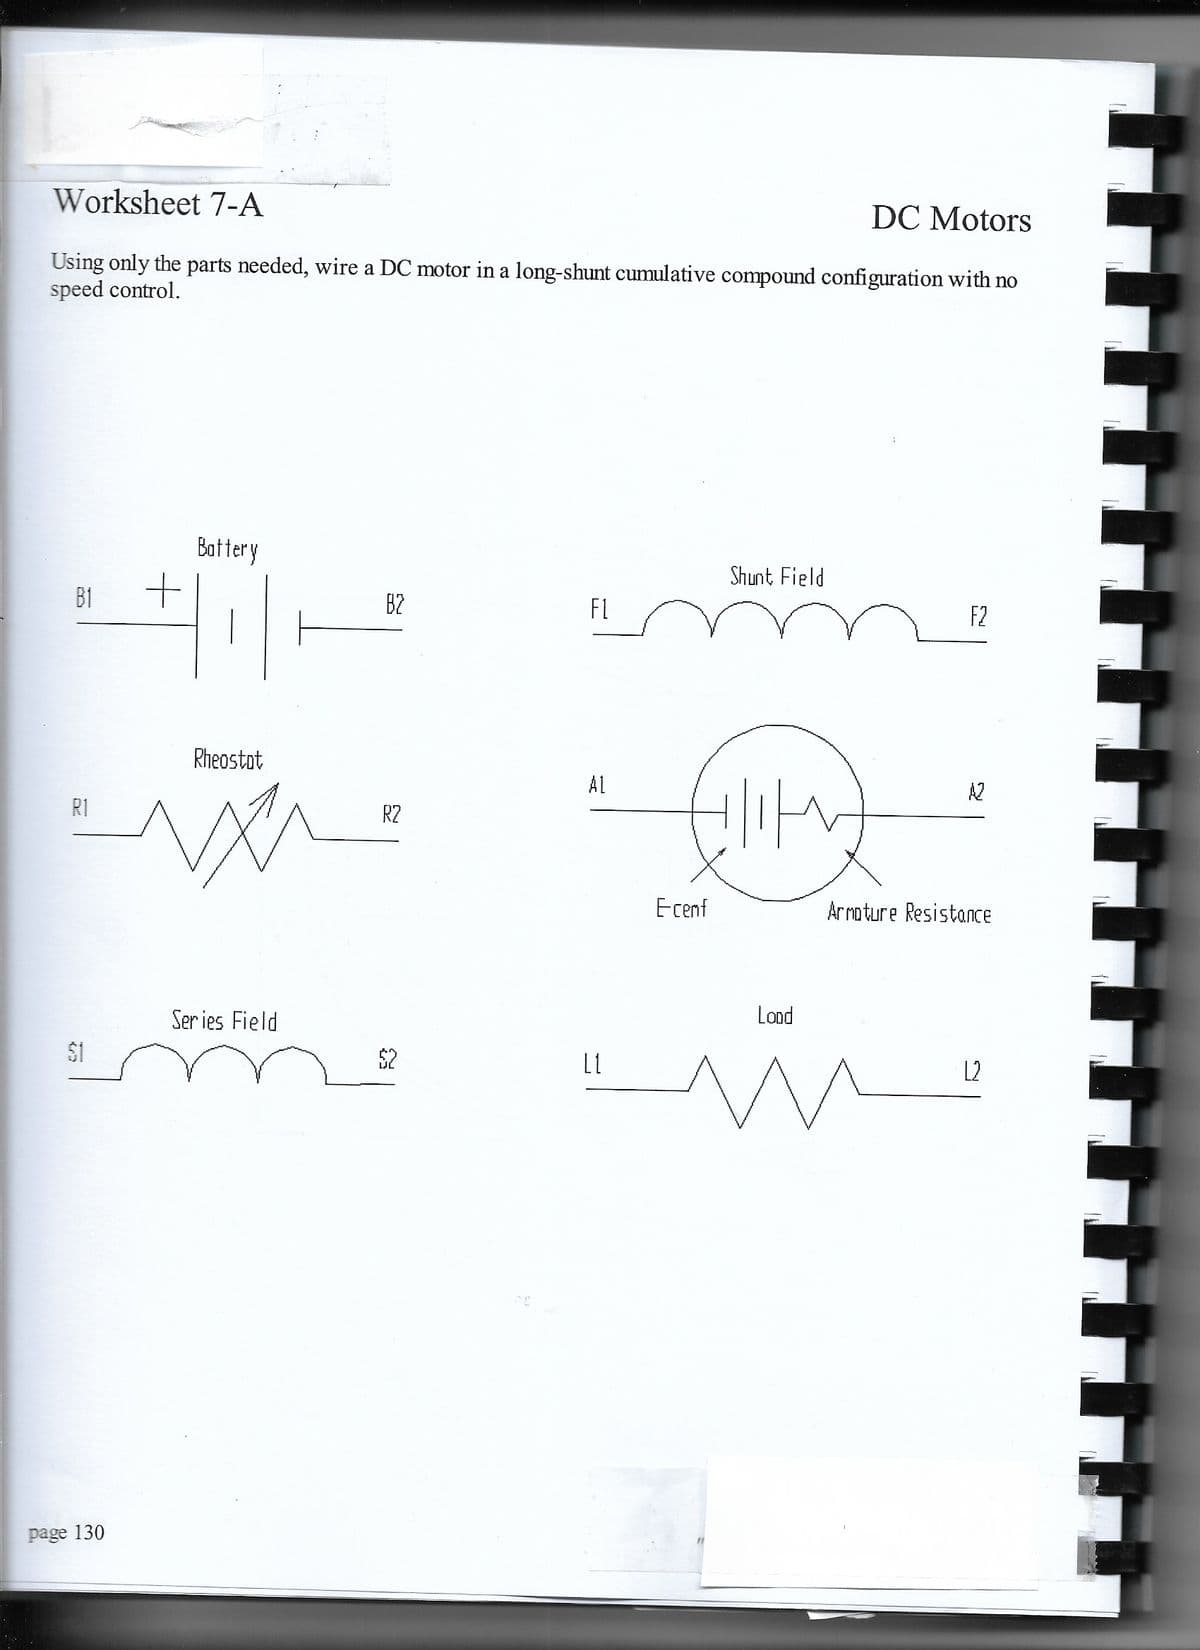 Worksheet 7-A
DC Motors
Using only the parts needed, wire a DC motor in a long-shunt cumulative compound configuration with no
speed control.
Battery
Shunt Field
B1
B2
FL
F2
Rheostot
AL
A2
R1
R2
Ecenf
Arnoture Resistance
Ser ies Field
Lond
$1
$2
L2
page 130
